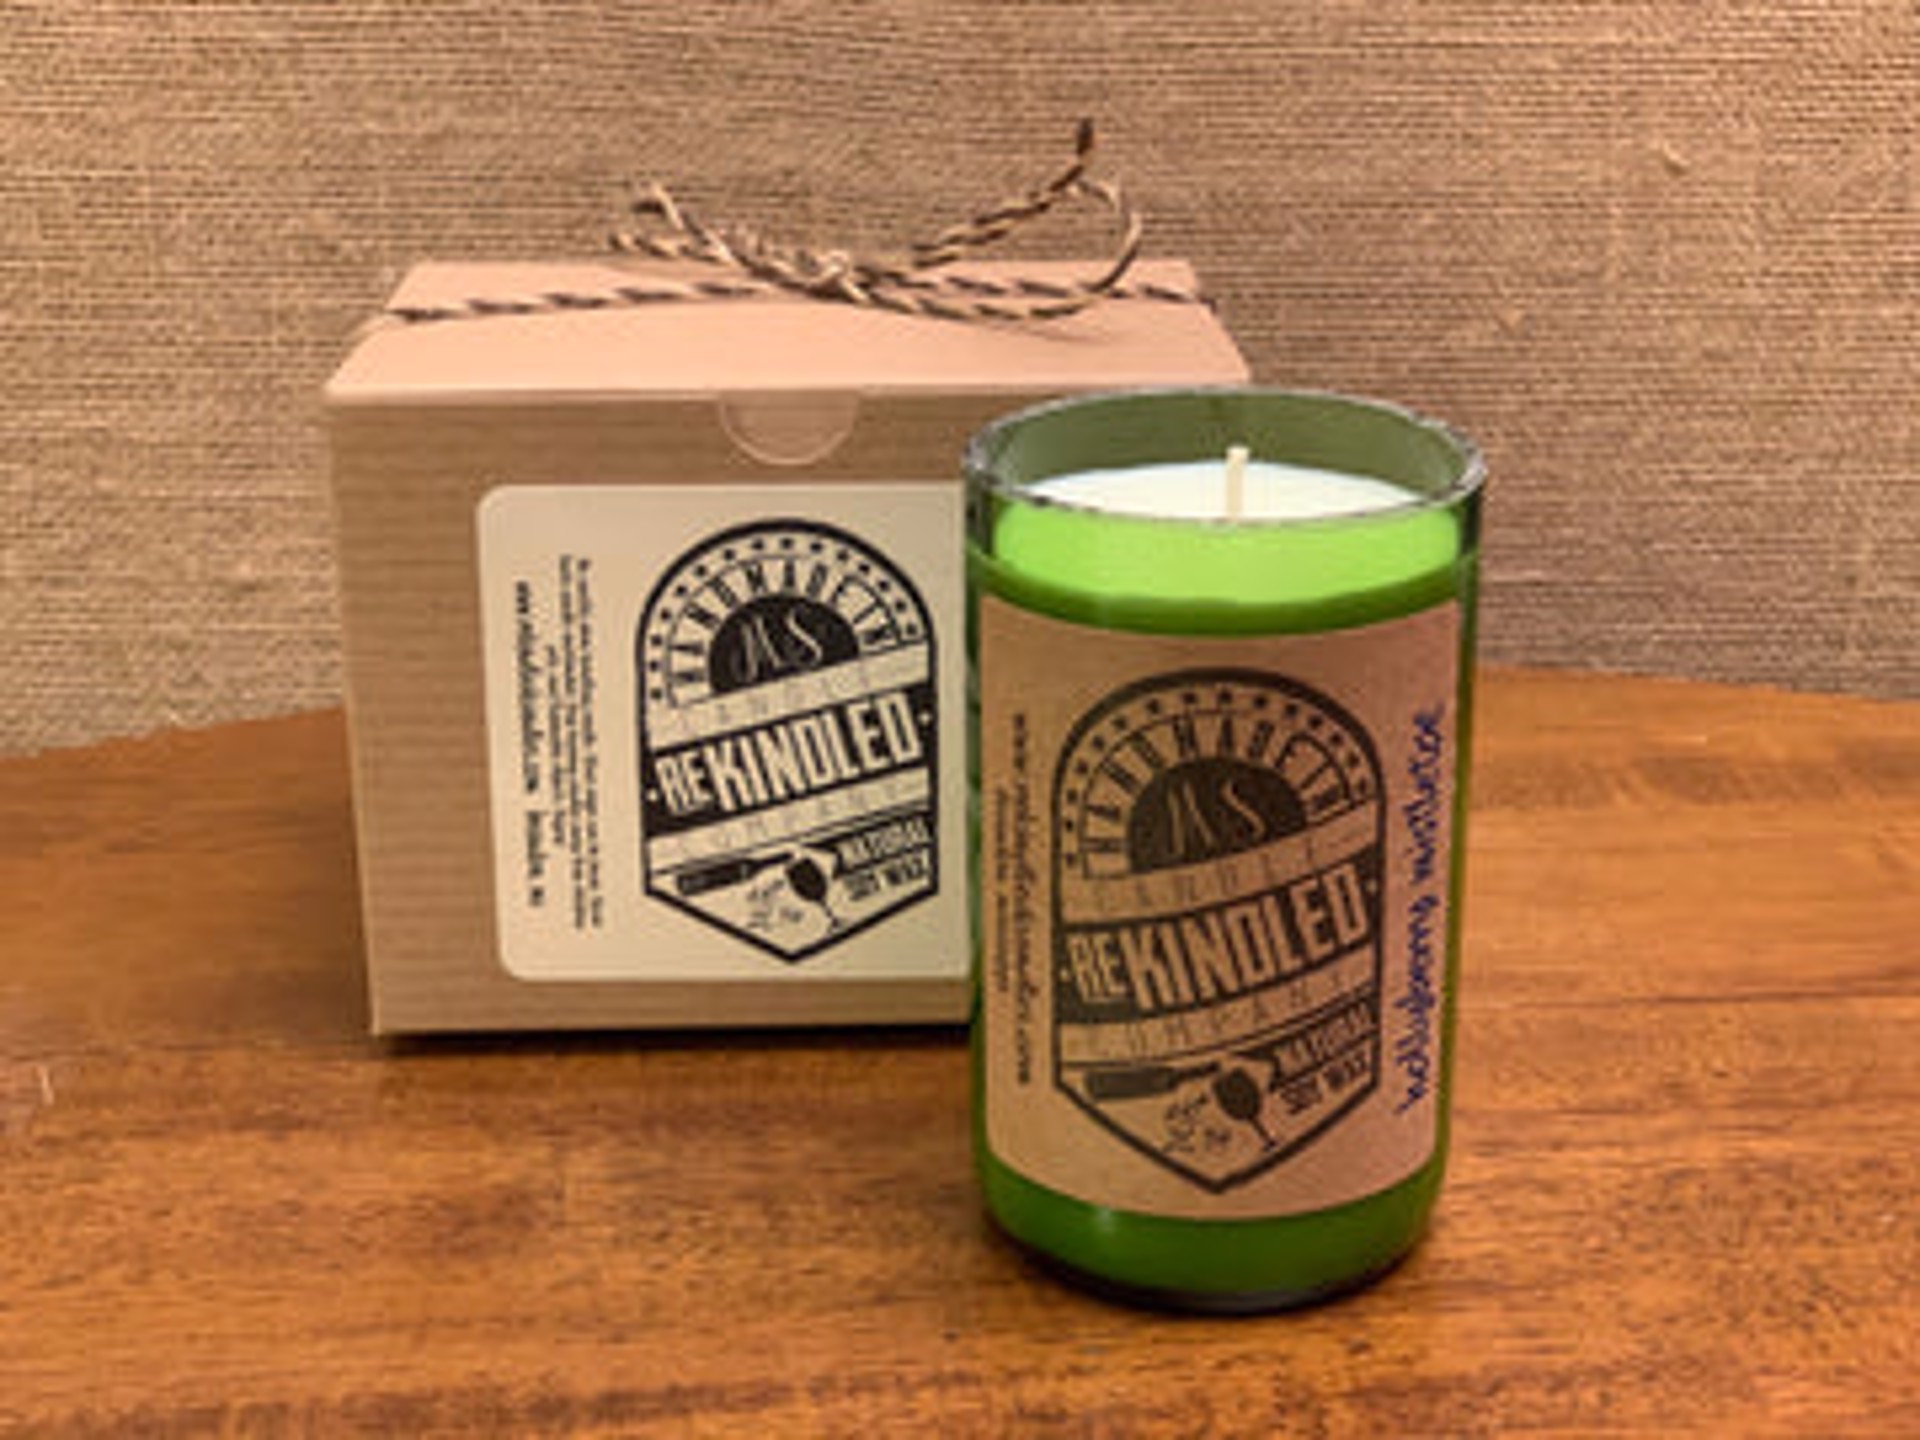 Cinnamon Apple Wine Bottle Candle by re-kindled candle company